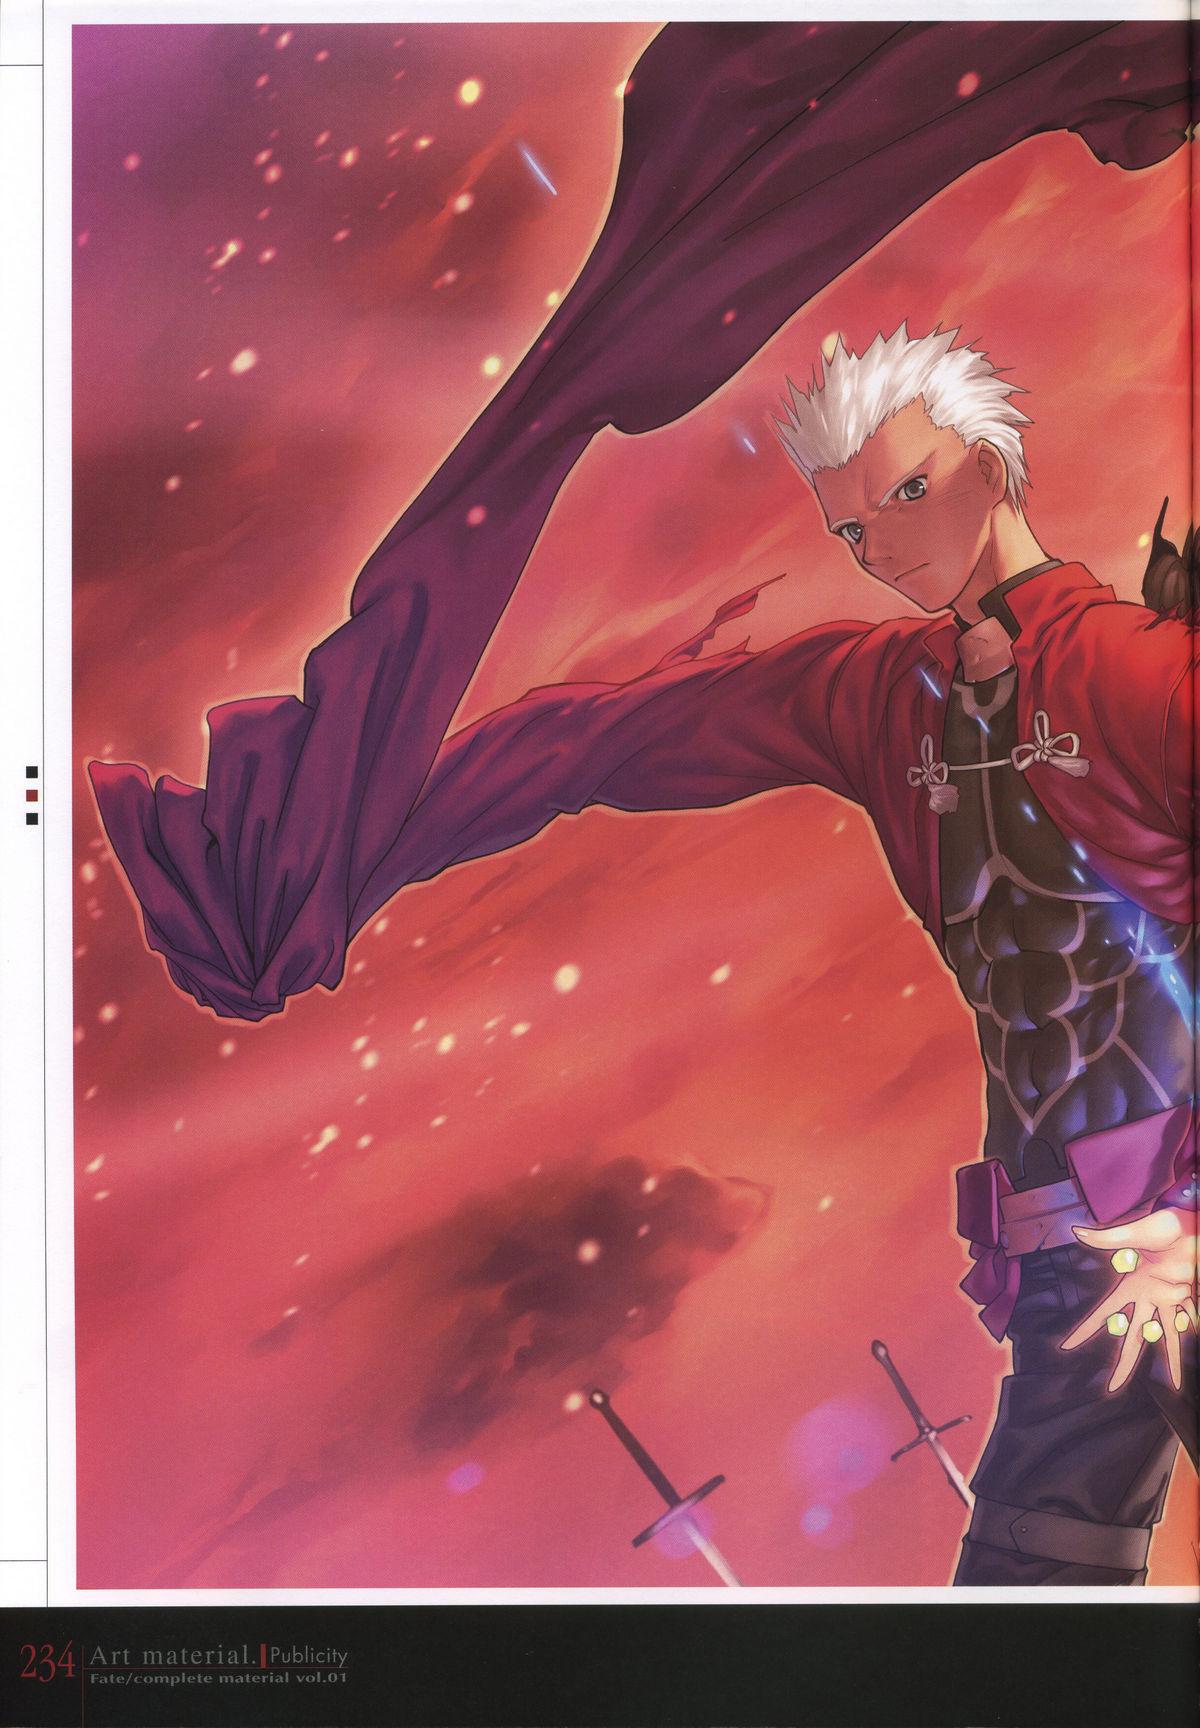 Fate/complete material I - Art material. 238